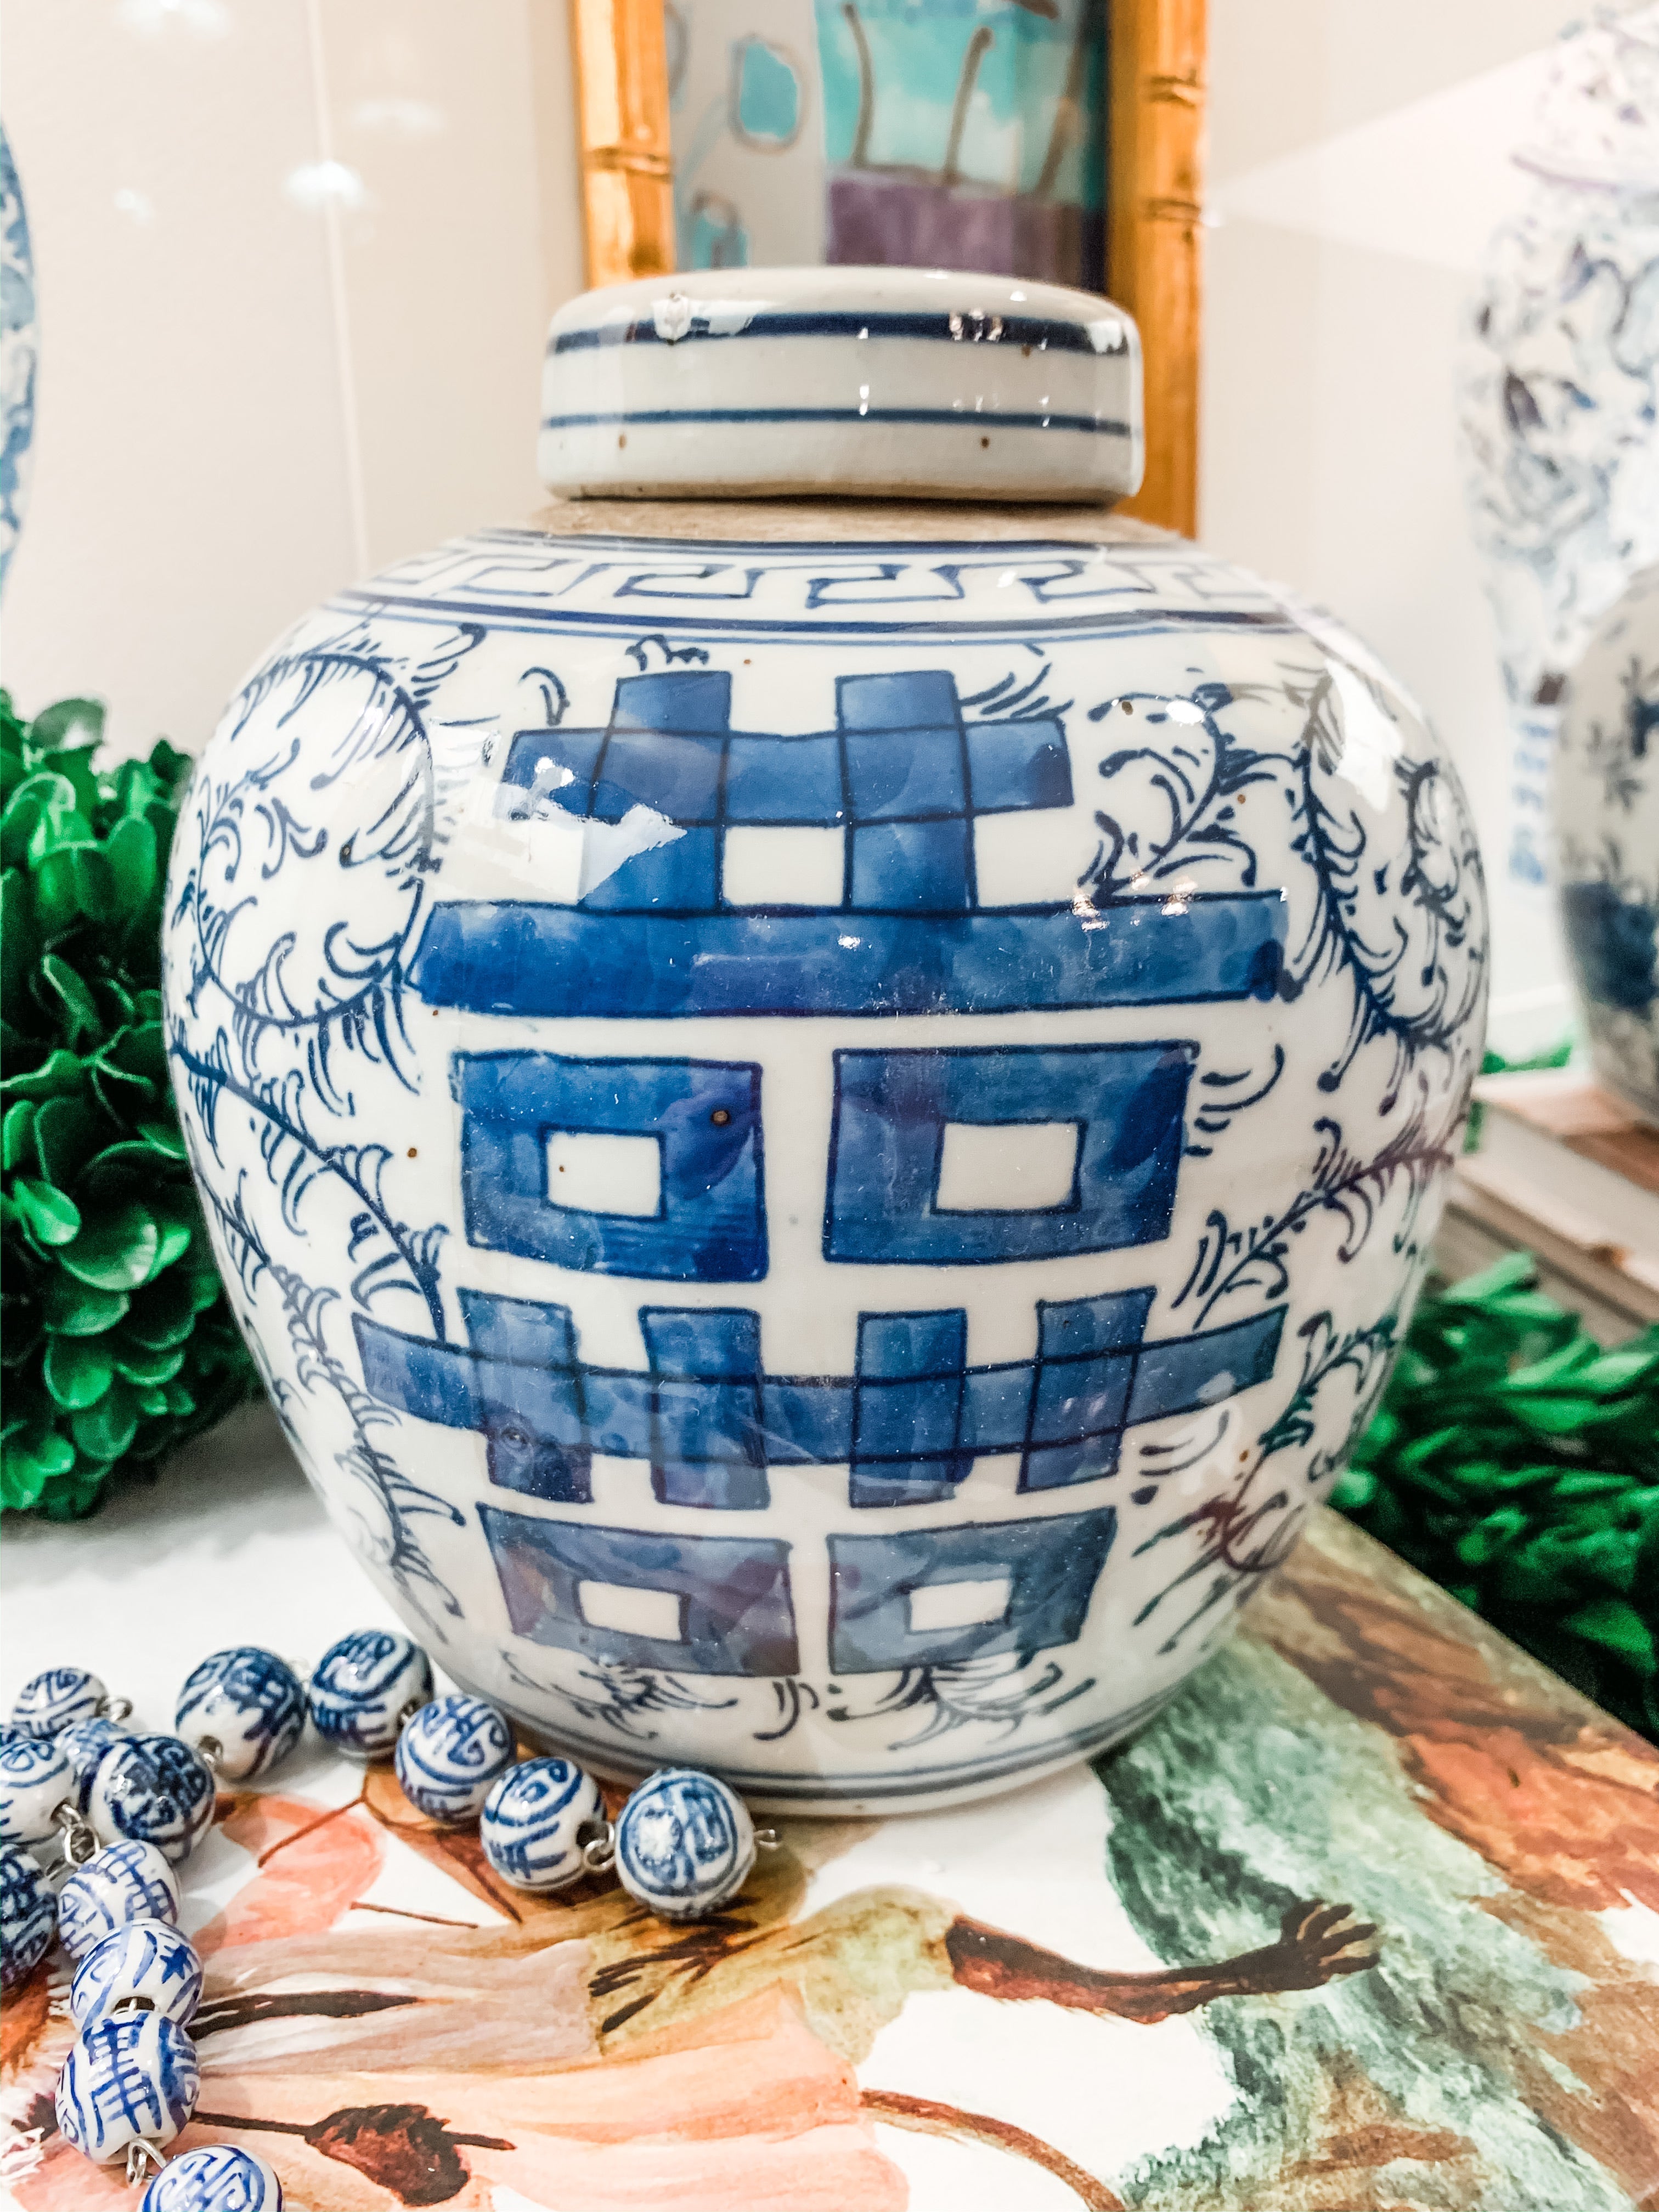 Shop Collectible Brooks for a wide selection of classic blue and white ginger jars, perfect for adding a touch of chinoiserie to your home decor!  This is a beautiful hand painted ginger jar featuring a double happiness design.  It is made in the antique style and stands 6.5" tall.